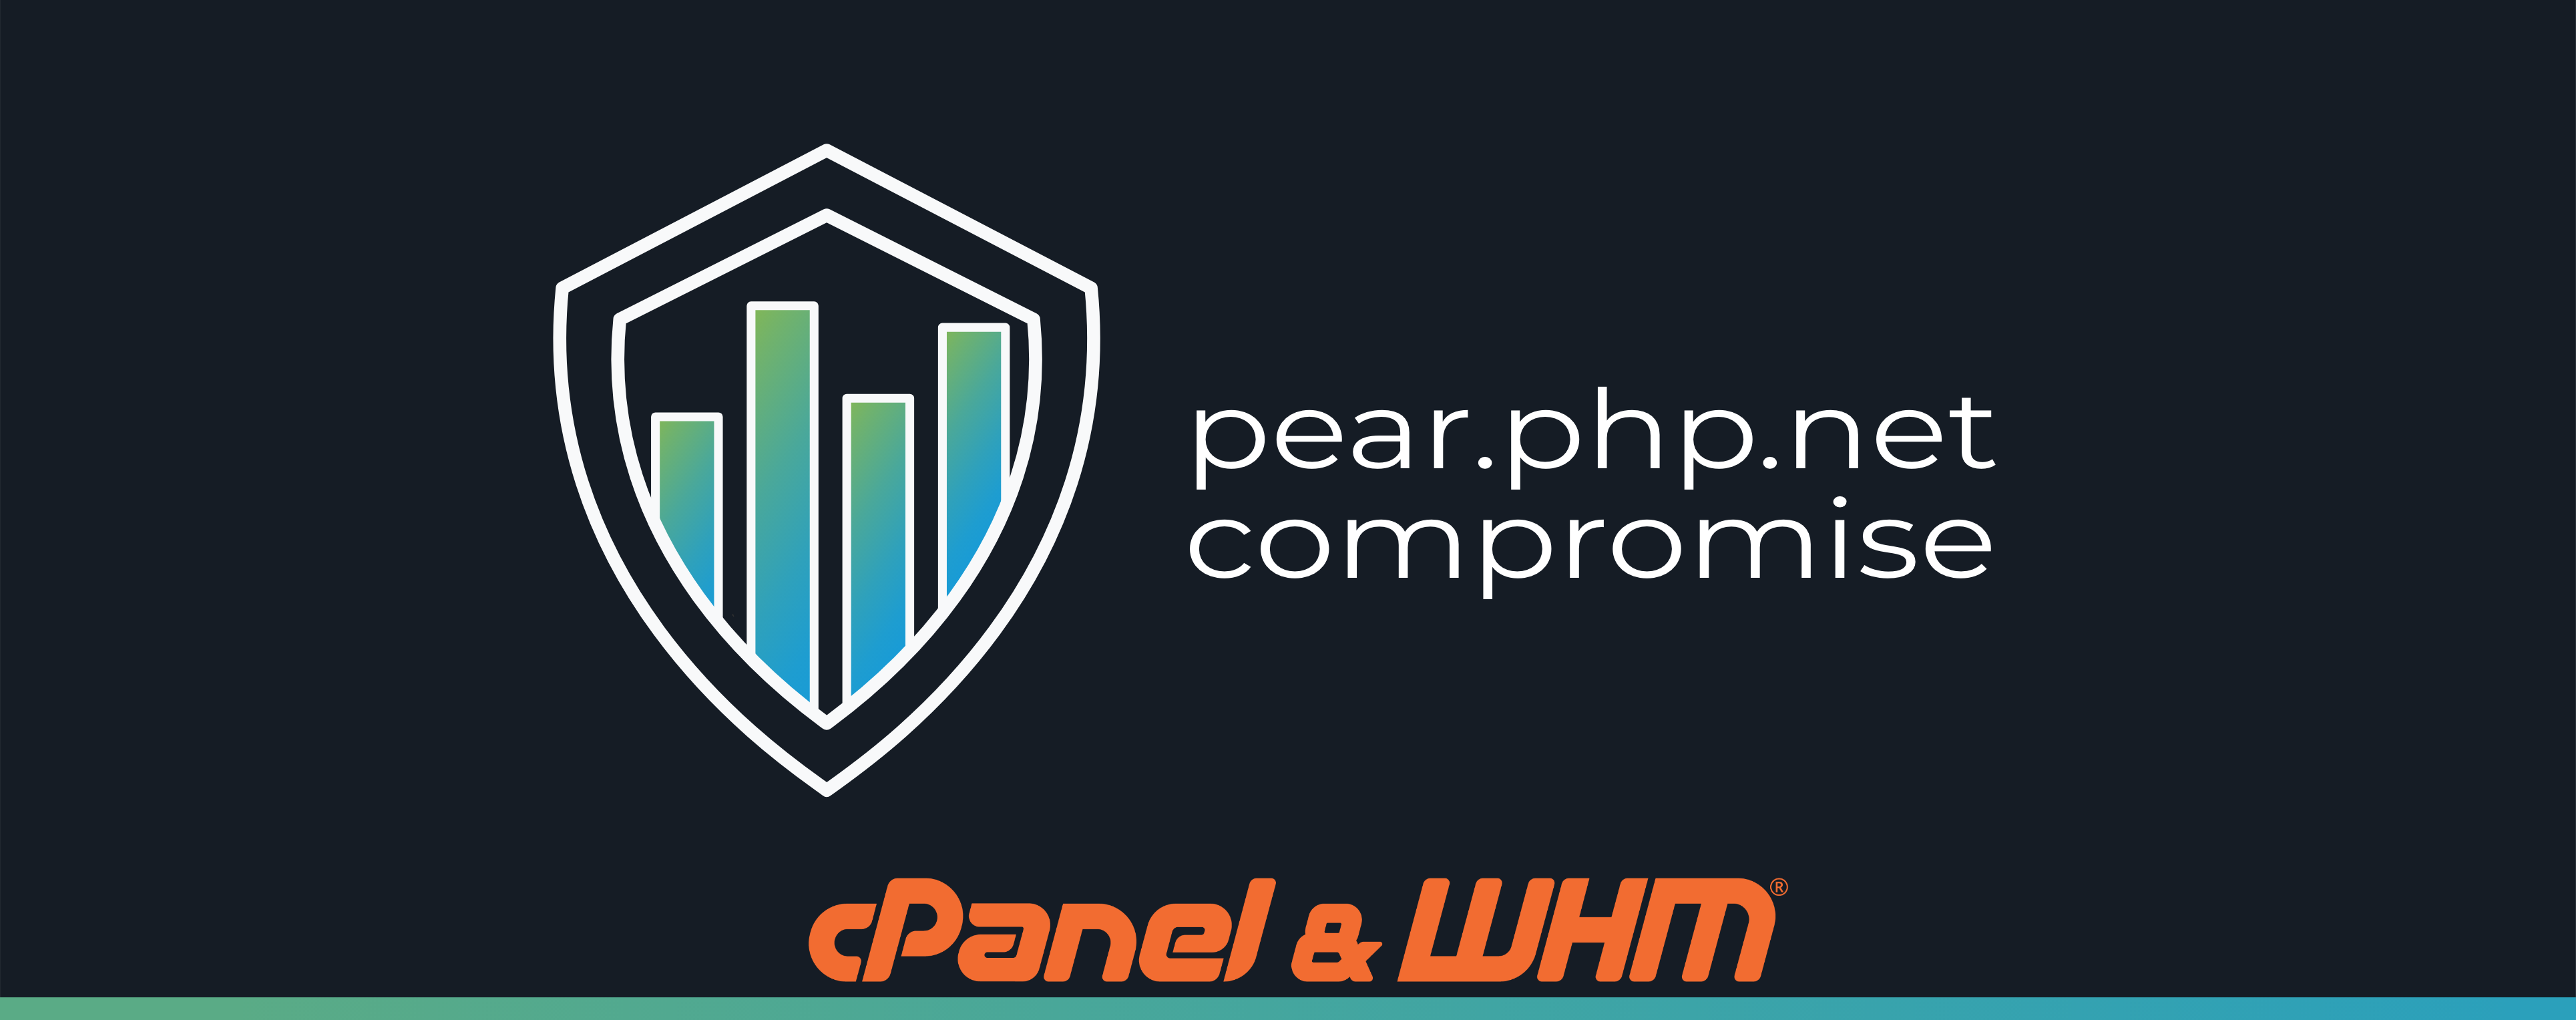 When PHP Went Pear Shaped- The PHP PEAR Compromise